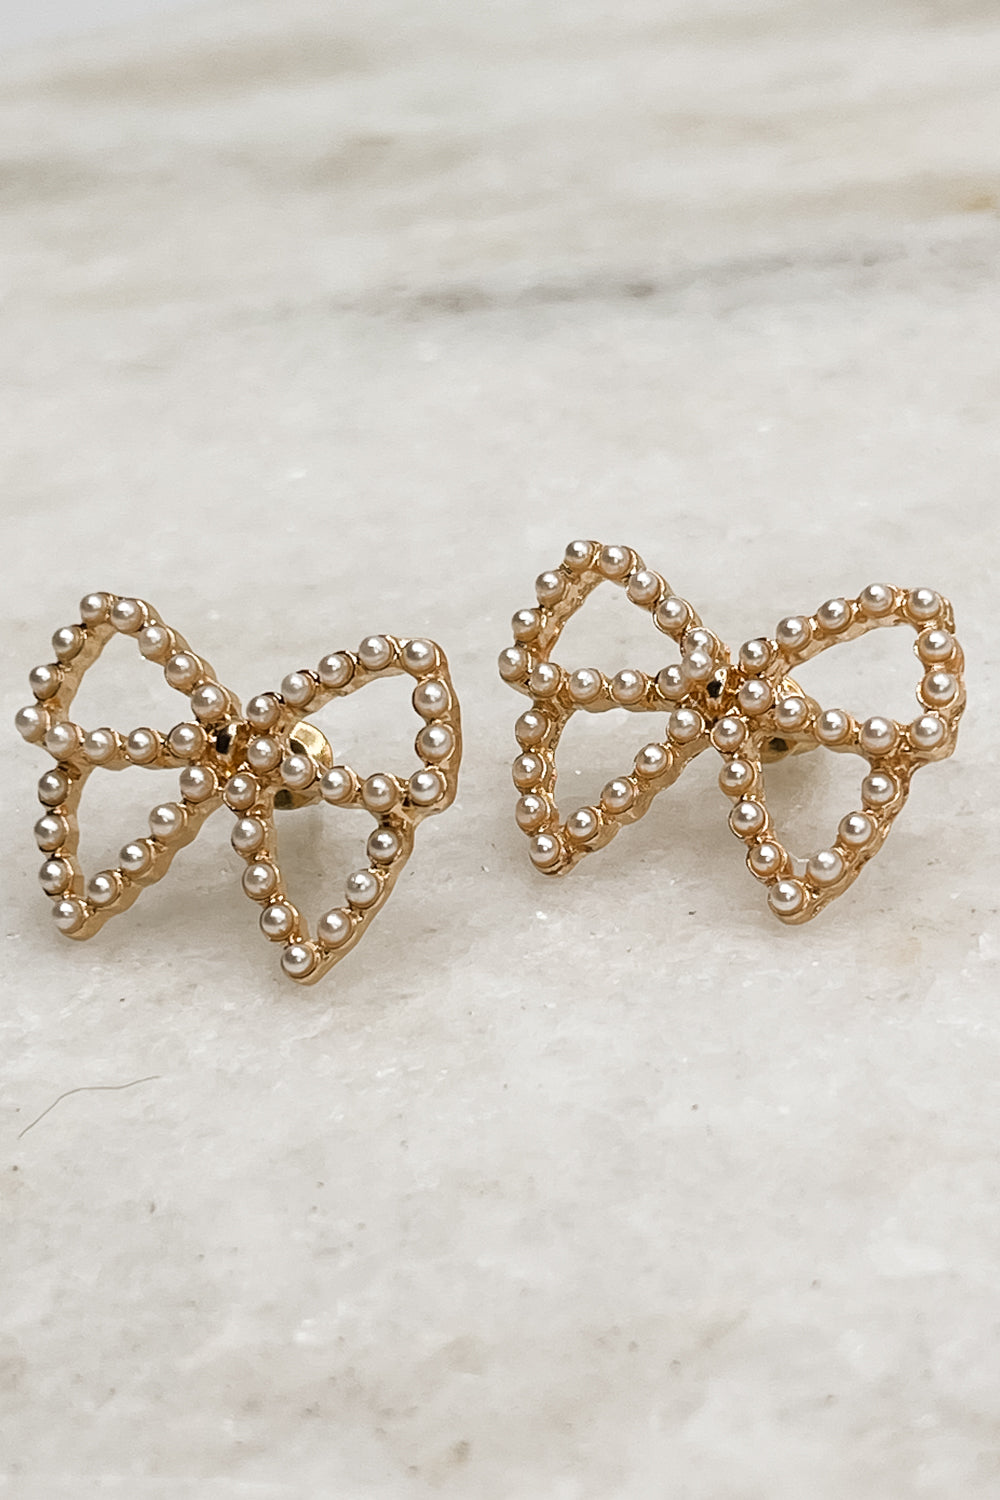 The Quincy Bow earrings sit against a neutral background.